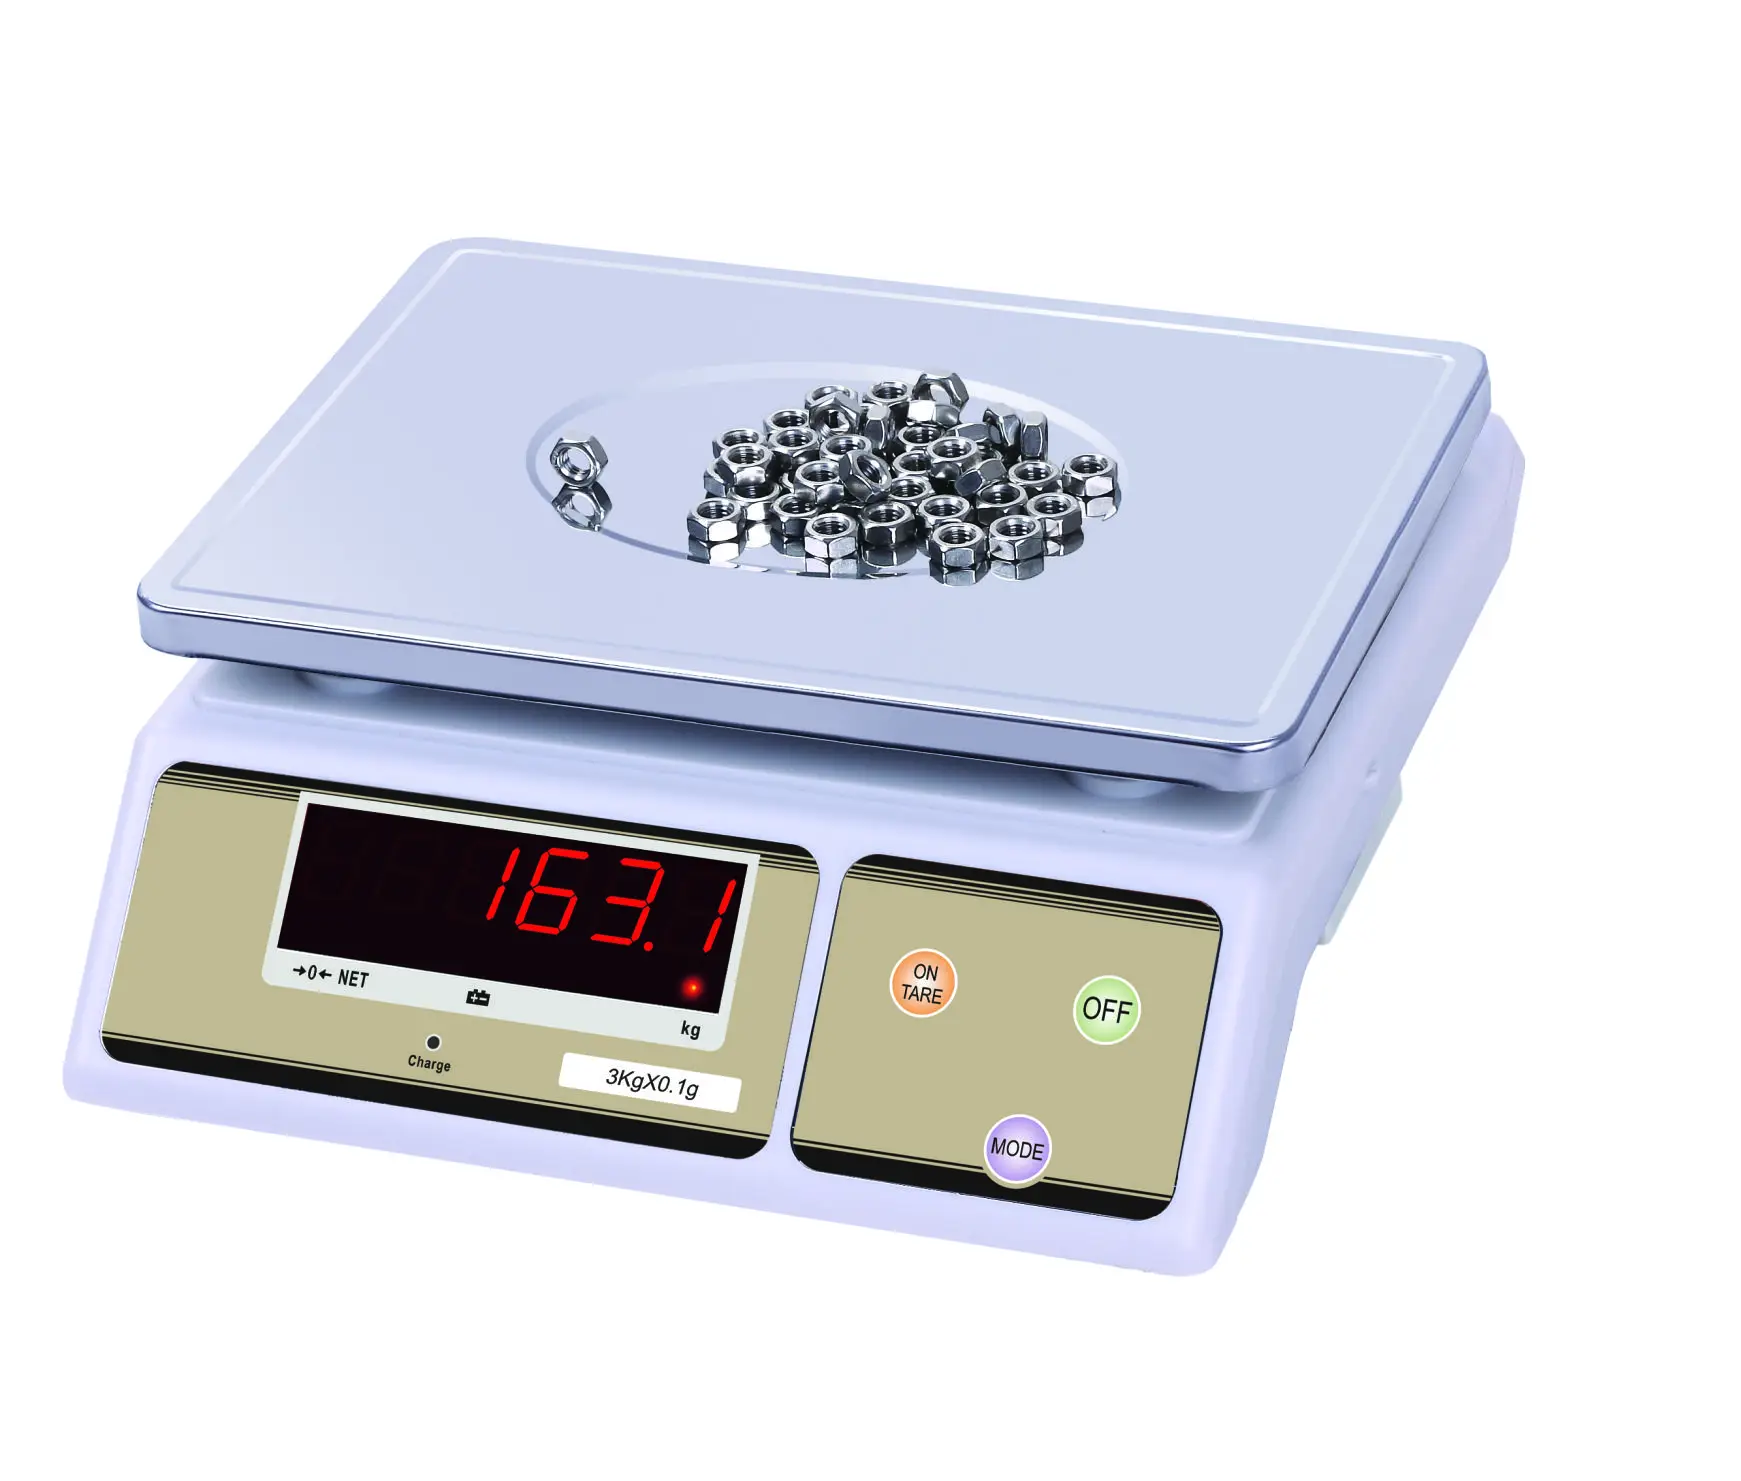 Digital Weighing  Scale kitchen scale3Kg 0.1g 6Kg0.2g 15Kg0.5g 30kg1gFood Scales Digital Weight Gram and Oz Scale with LCD/ Tare bluetooth electronic scale body fat scale weight scales weighing for body digital weight scales toughened glass lcd display